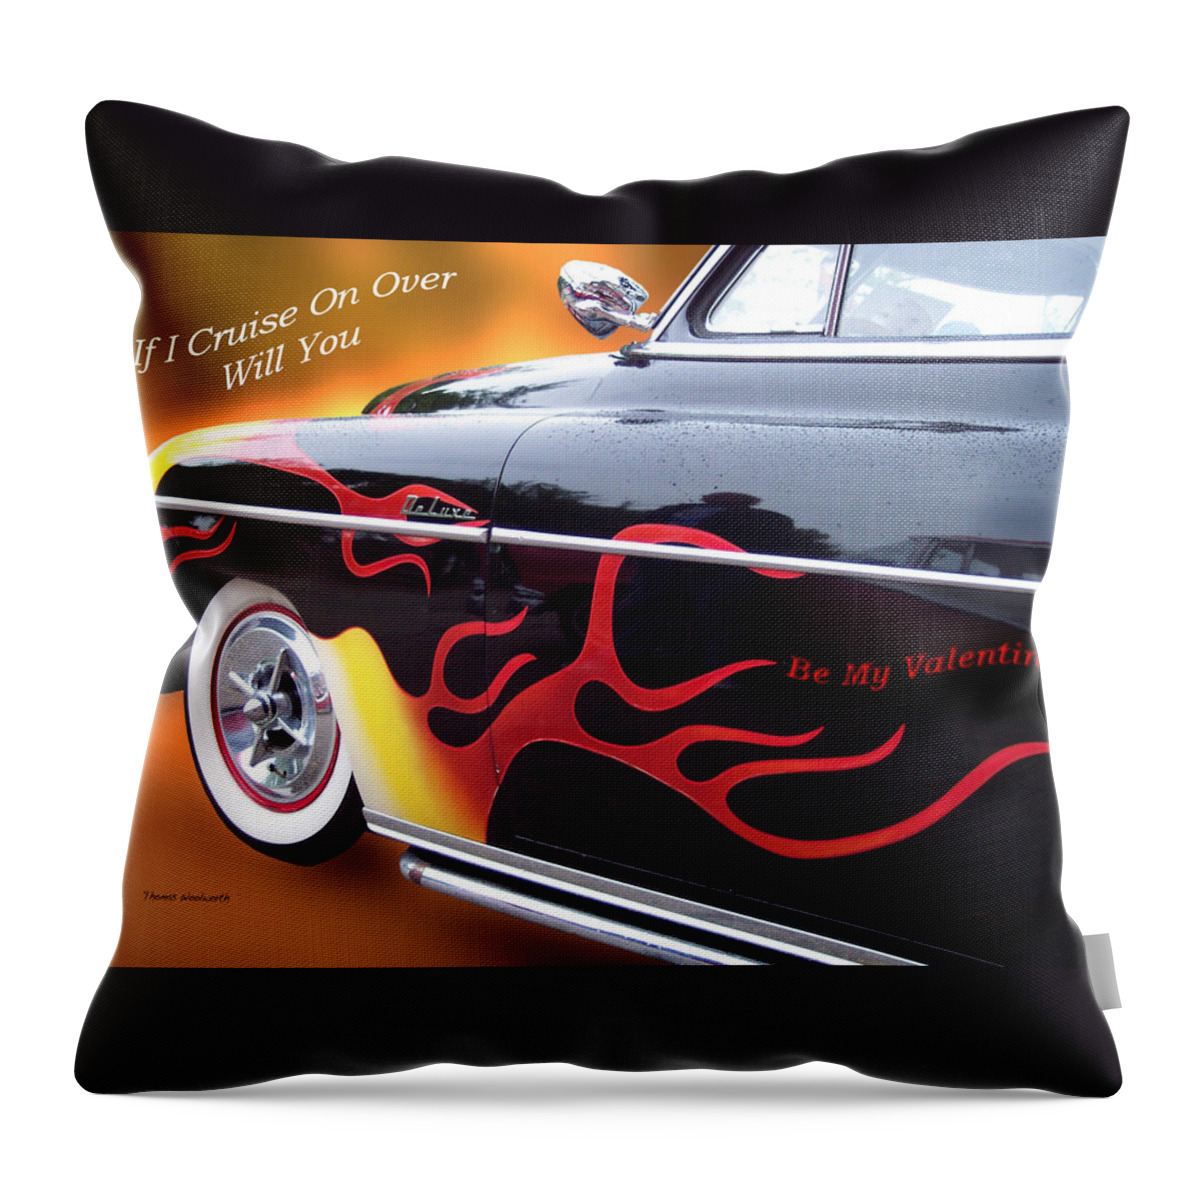 St. Valentine Throw Pillow featuring the photograph Valentine Cruise On Over by Thomas Woolworth